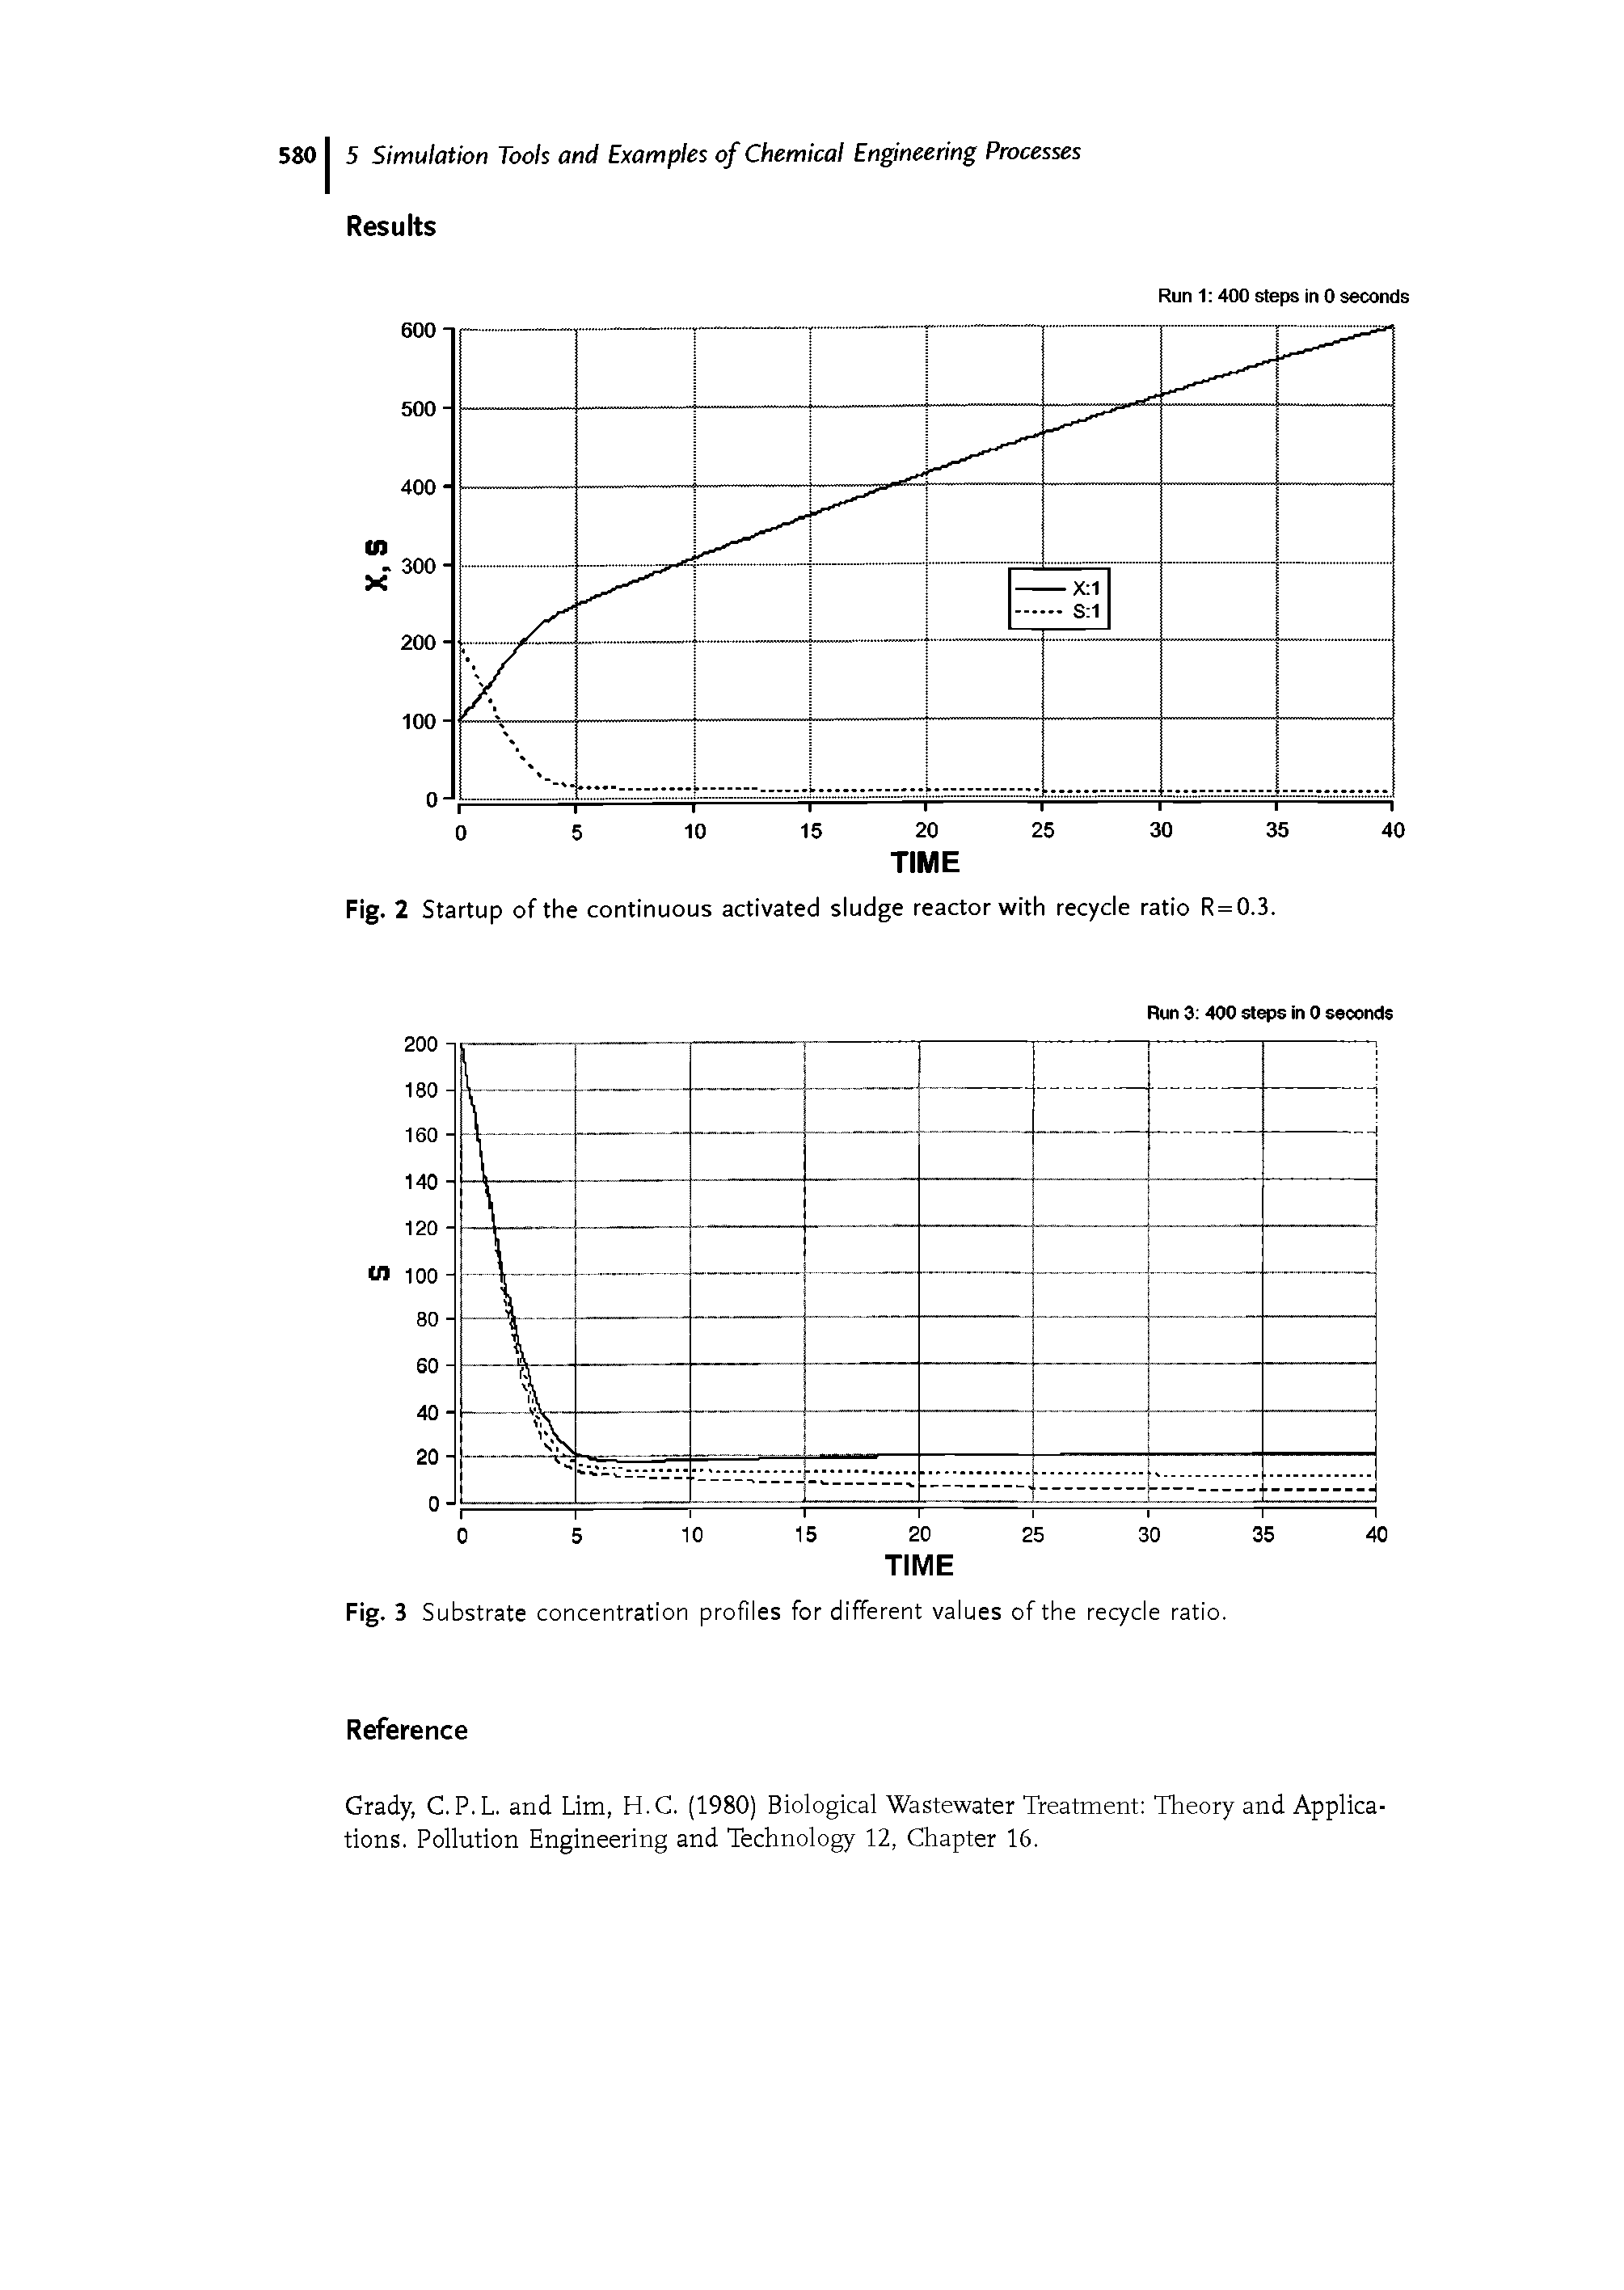 Fig. 2 Startup of the continuous activated sludge reactor with recycle ratio R = 0.3.